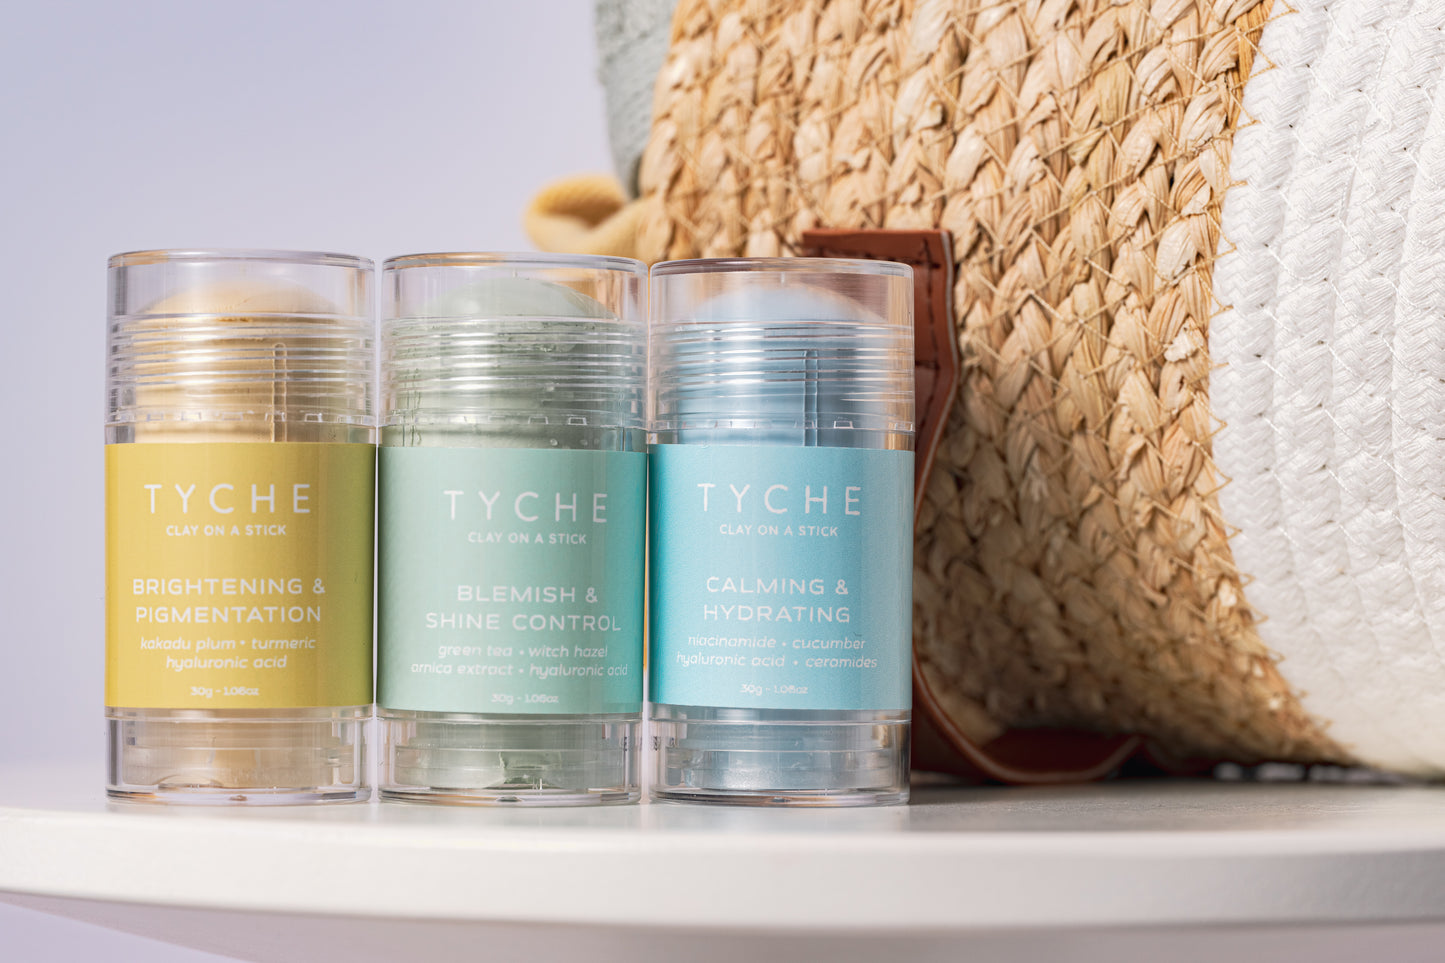 TYCHE CLEARER & BRIGHTER PACKAGE